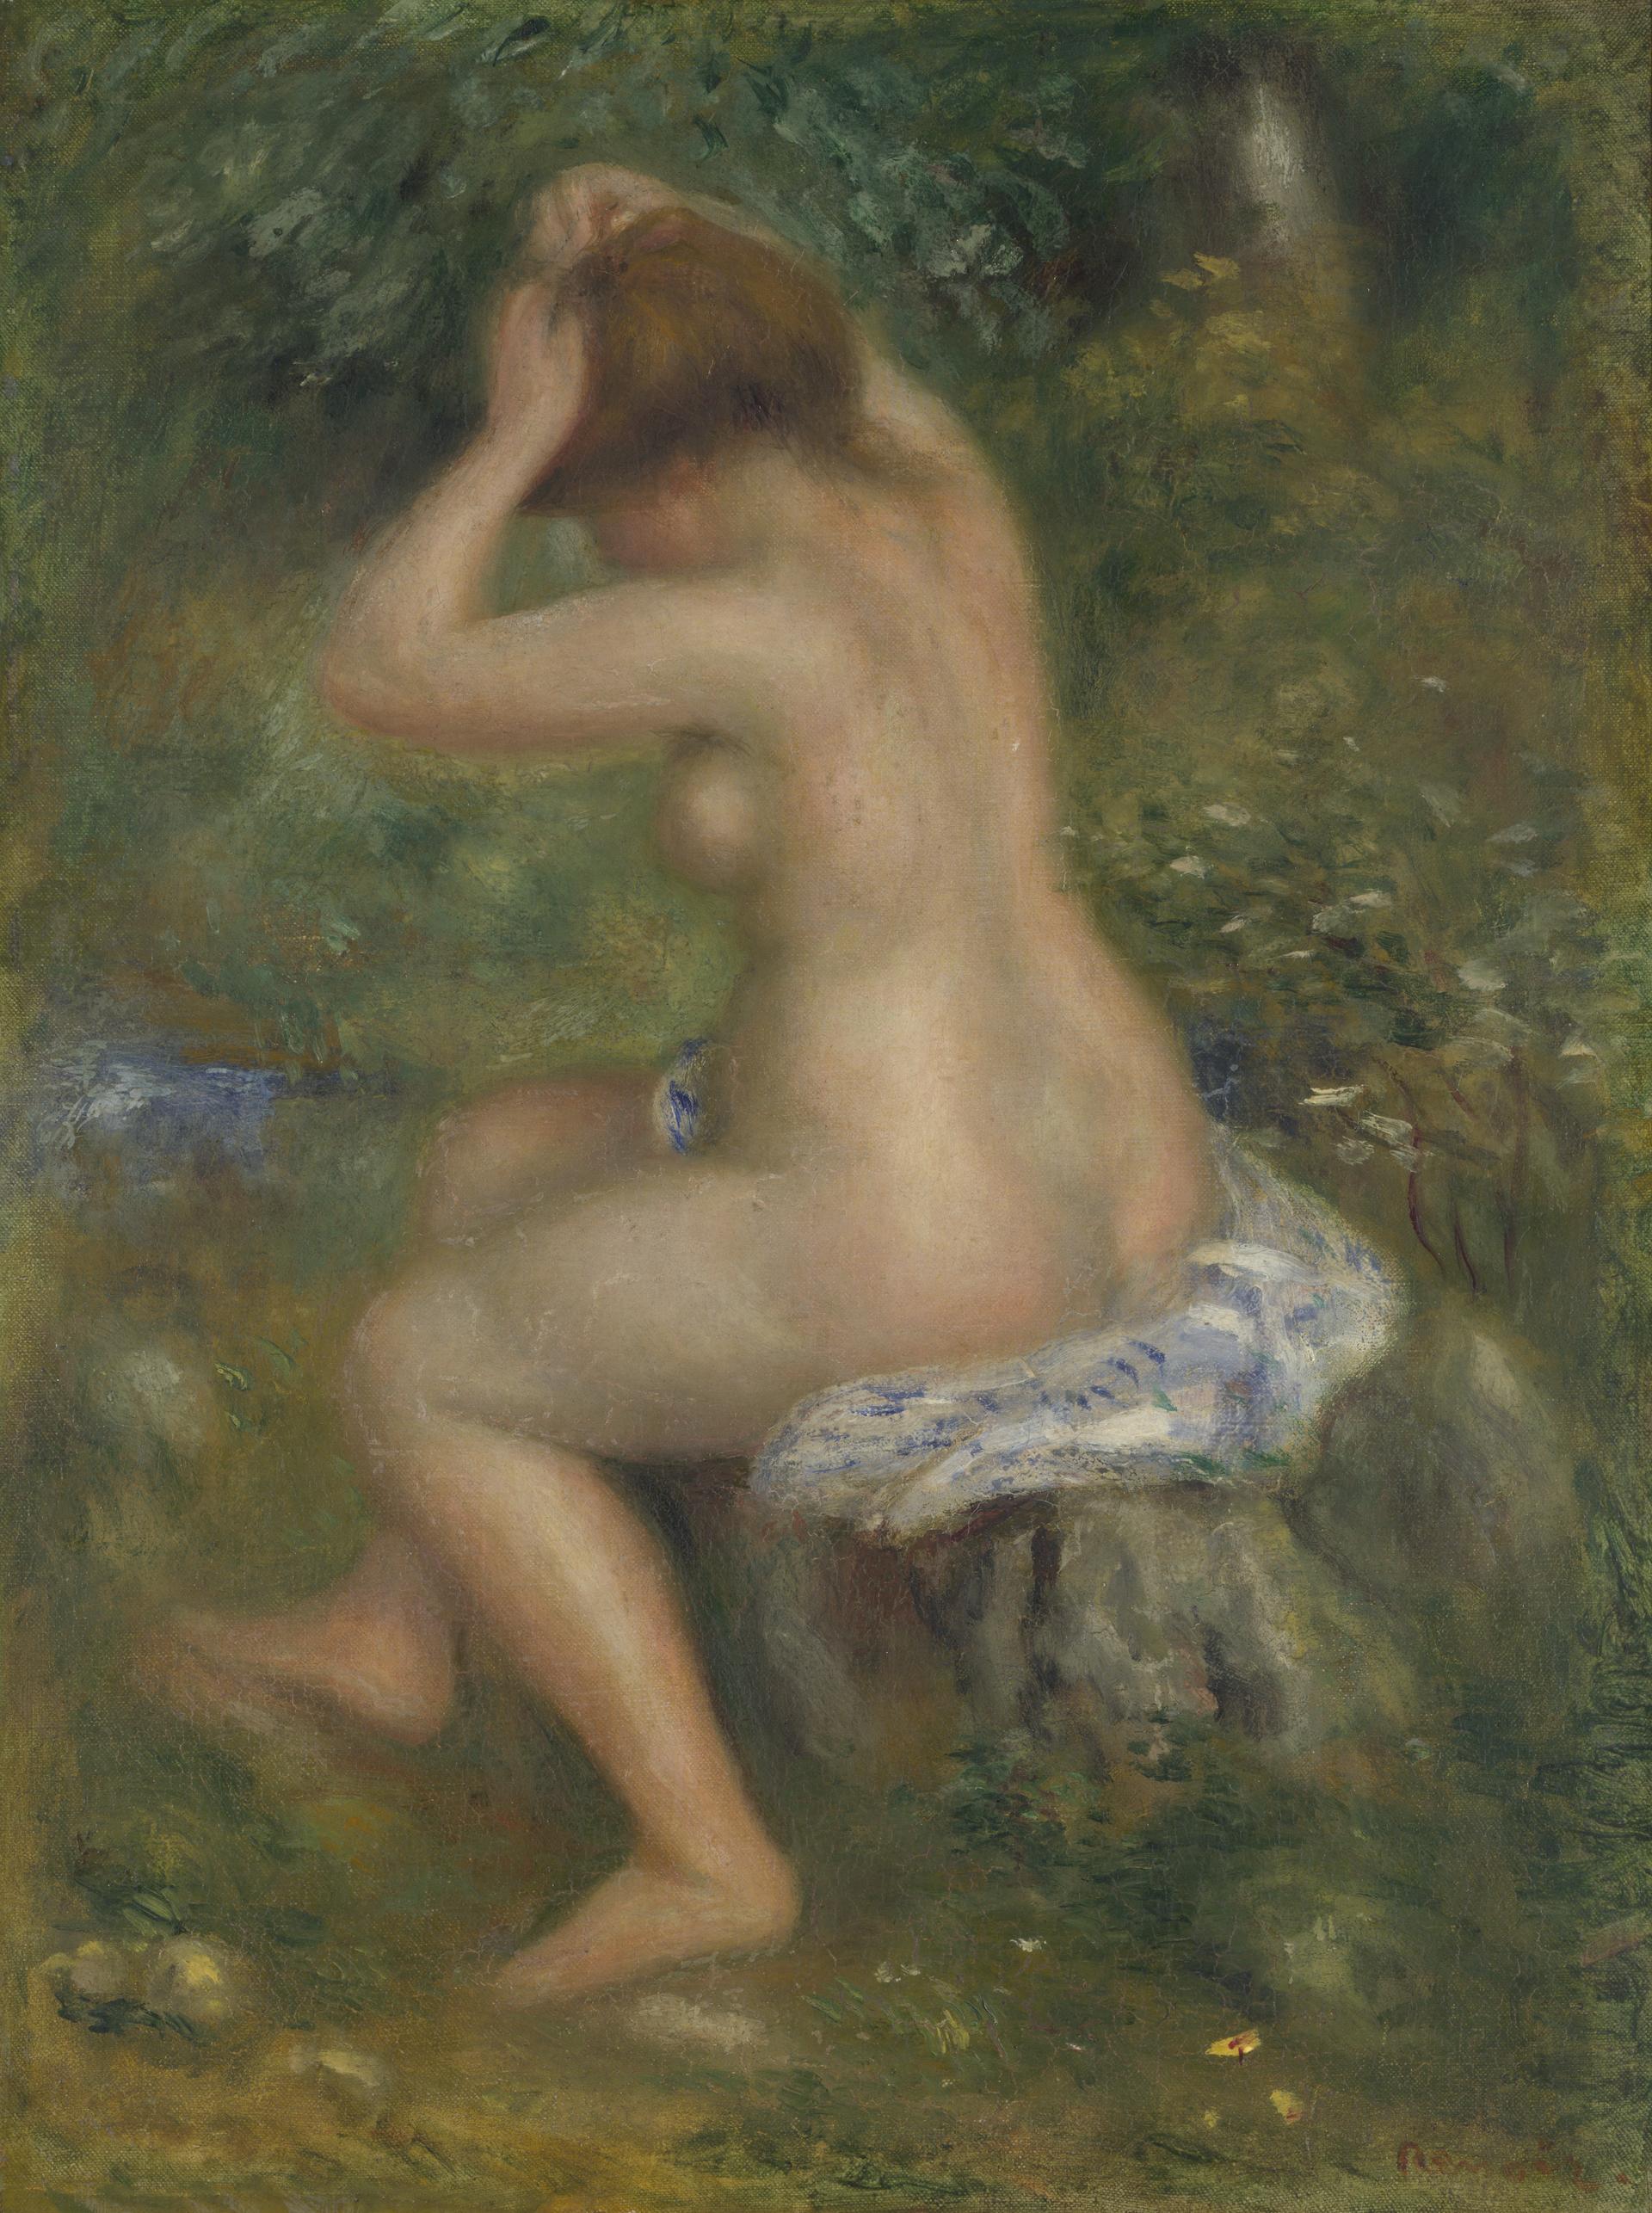 Nymph is nude in water